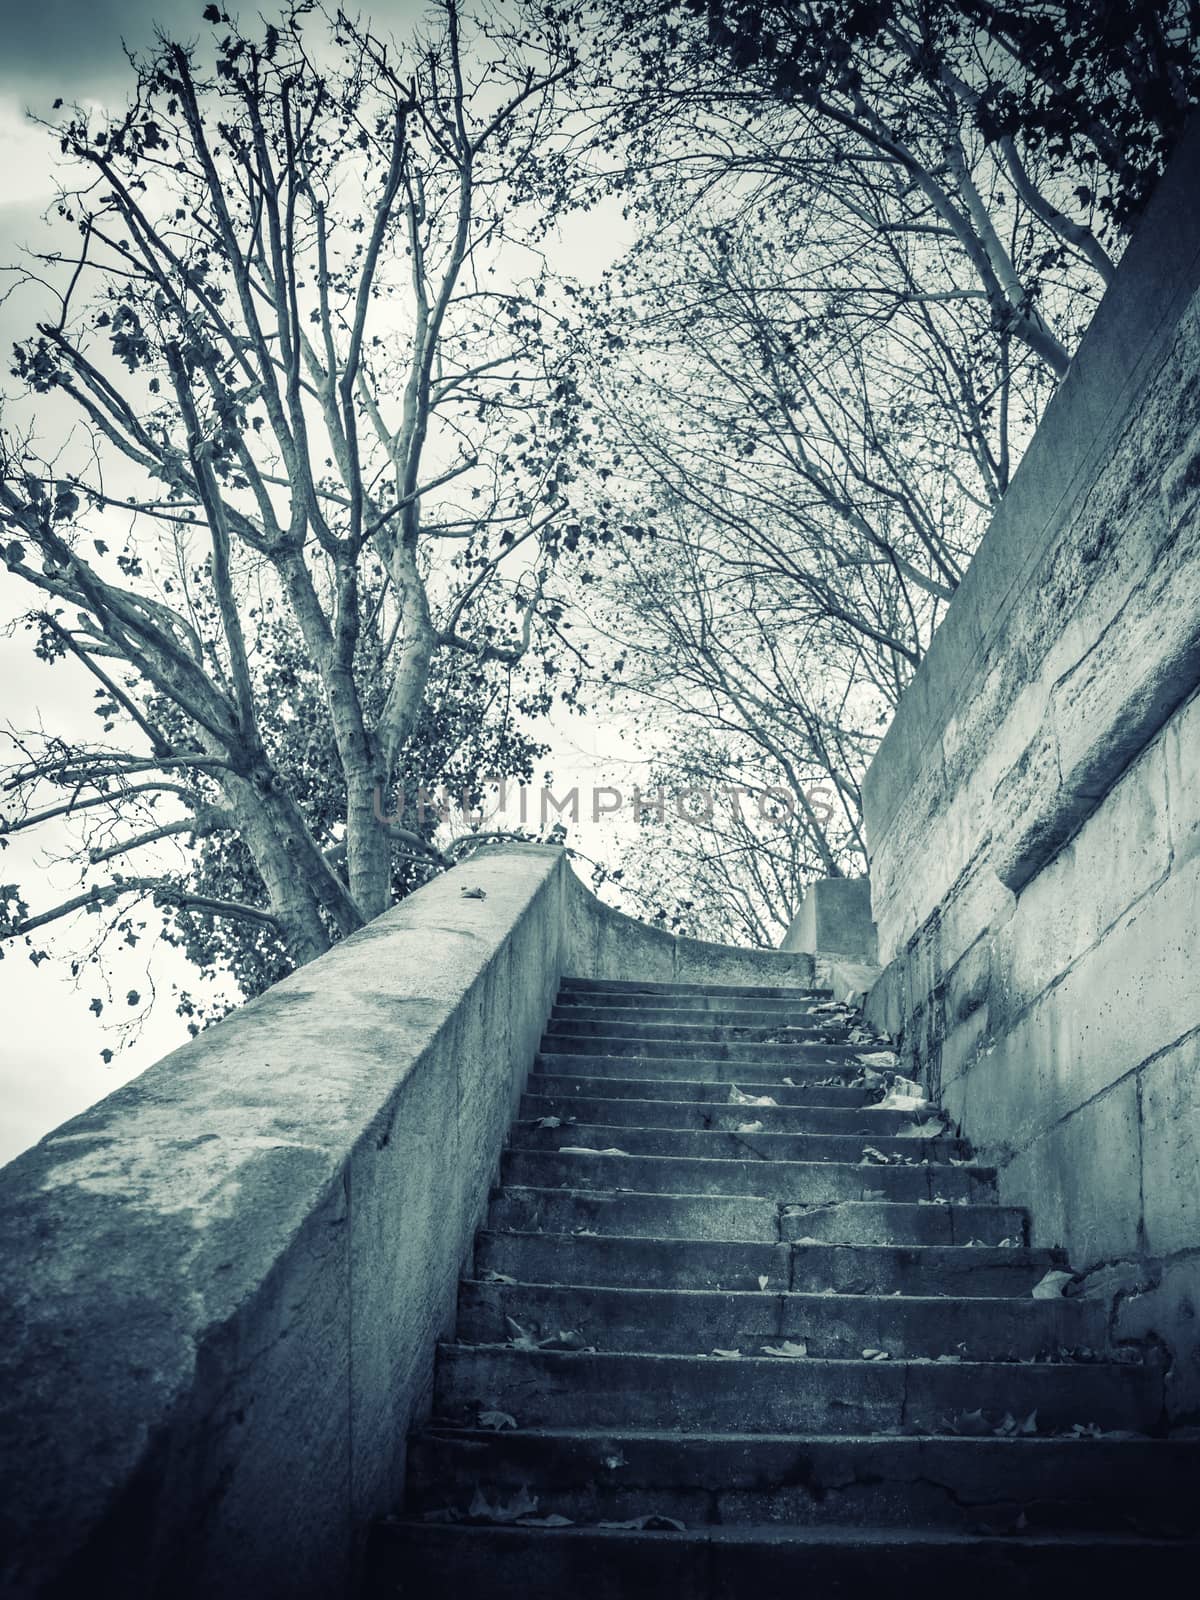 Stairs by the Seine river in Paris France